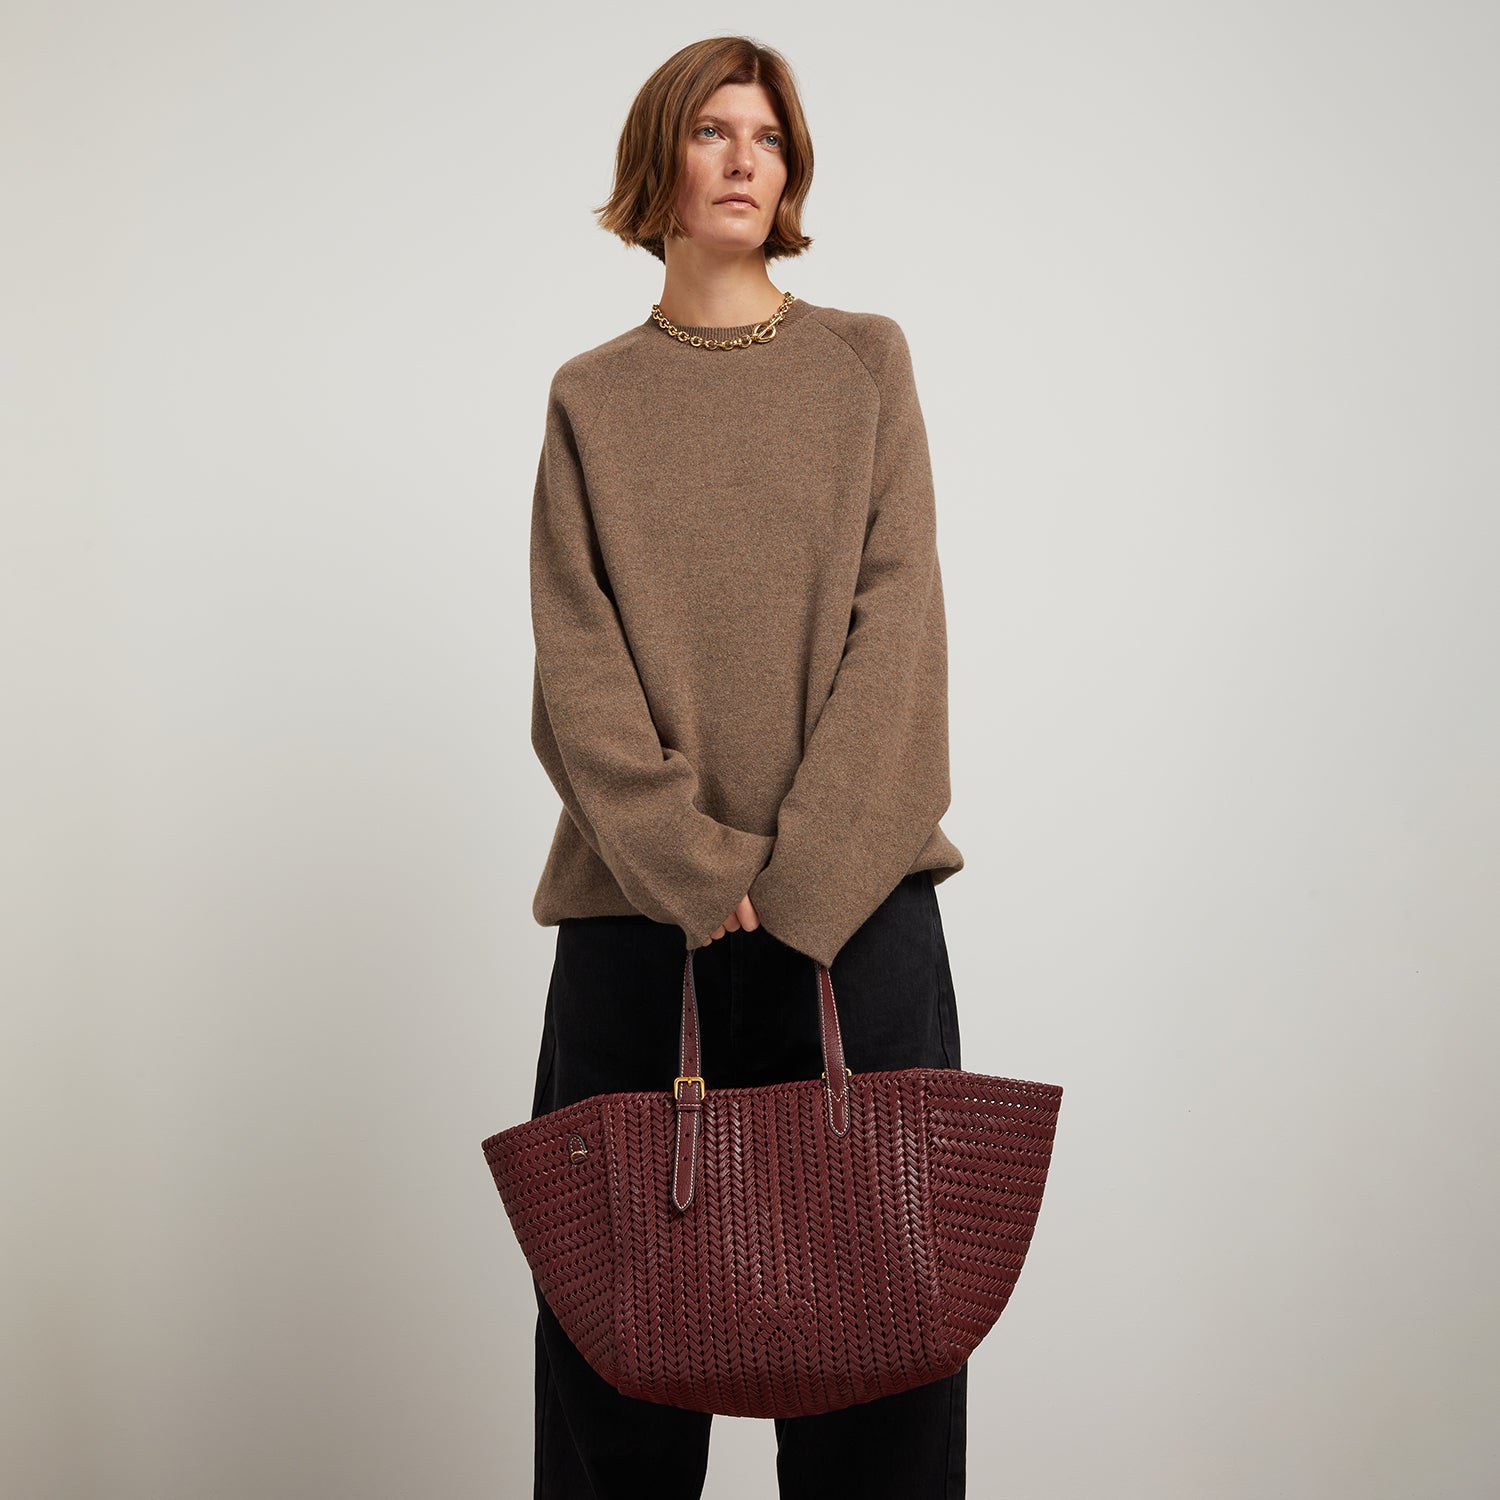 Neeson Square Tote -

                  
                    Capra Leather in Rosewood -
                  

                  Anya Hindmarch UK
